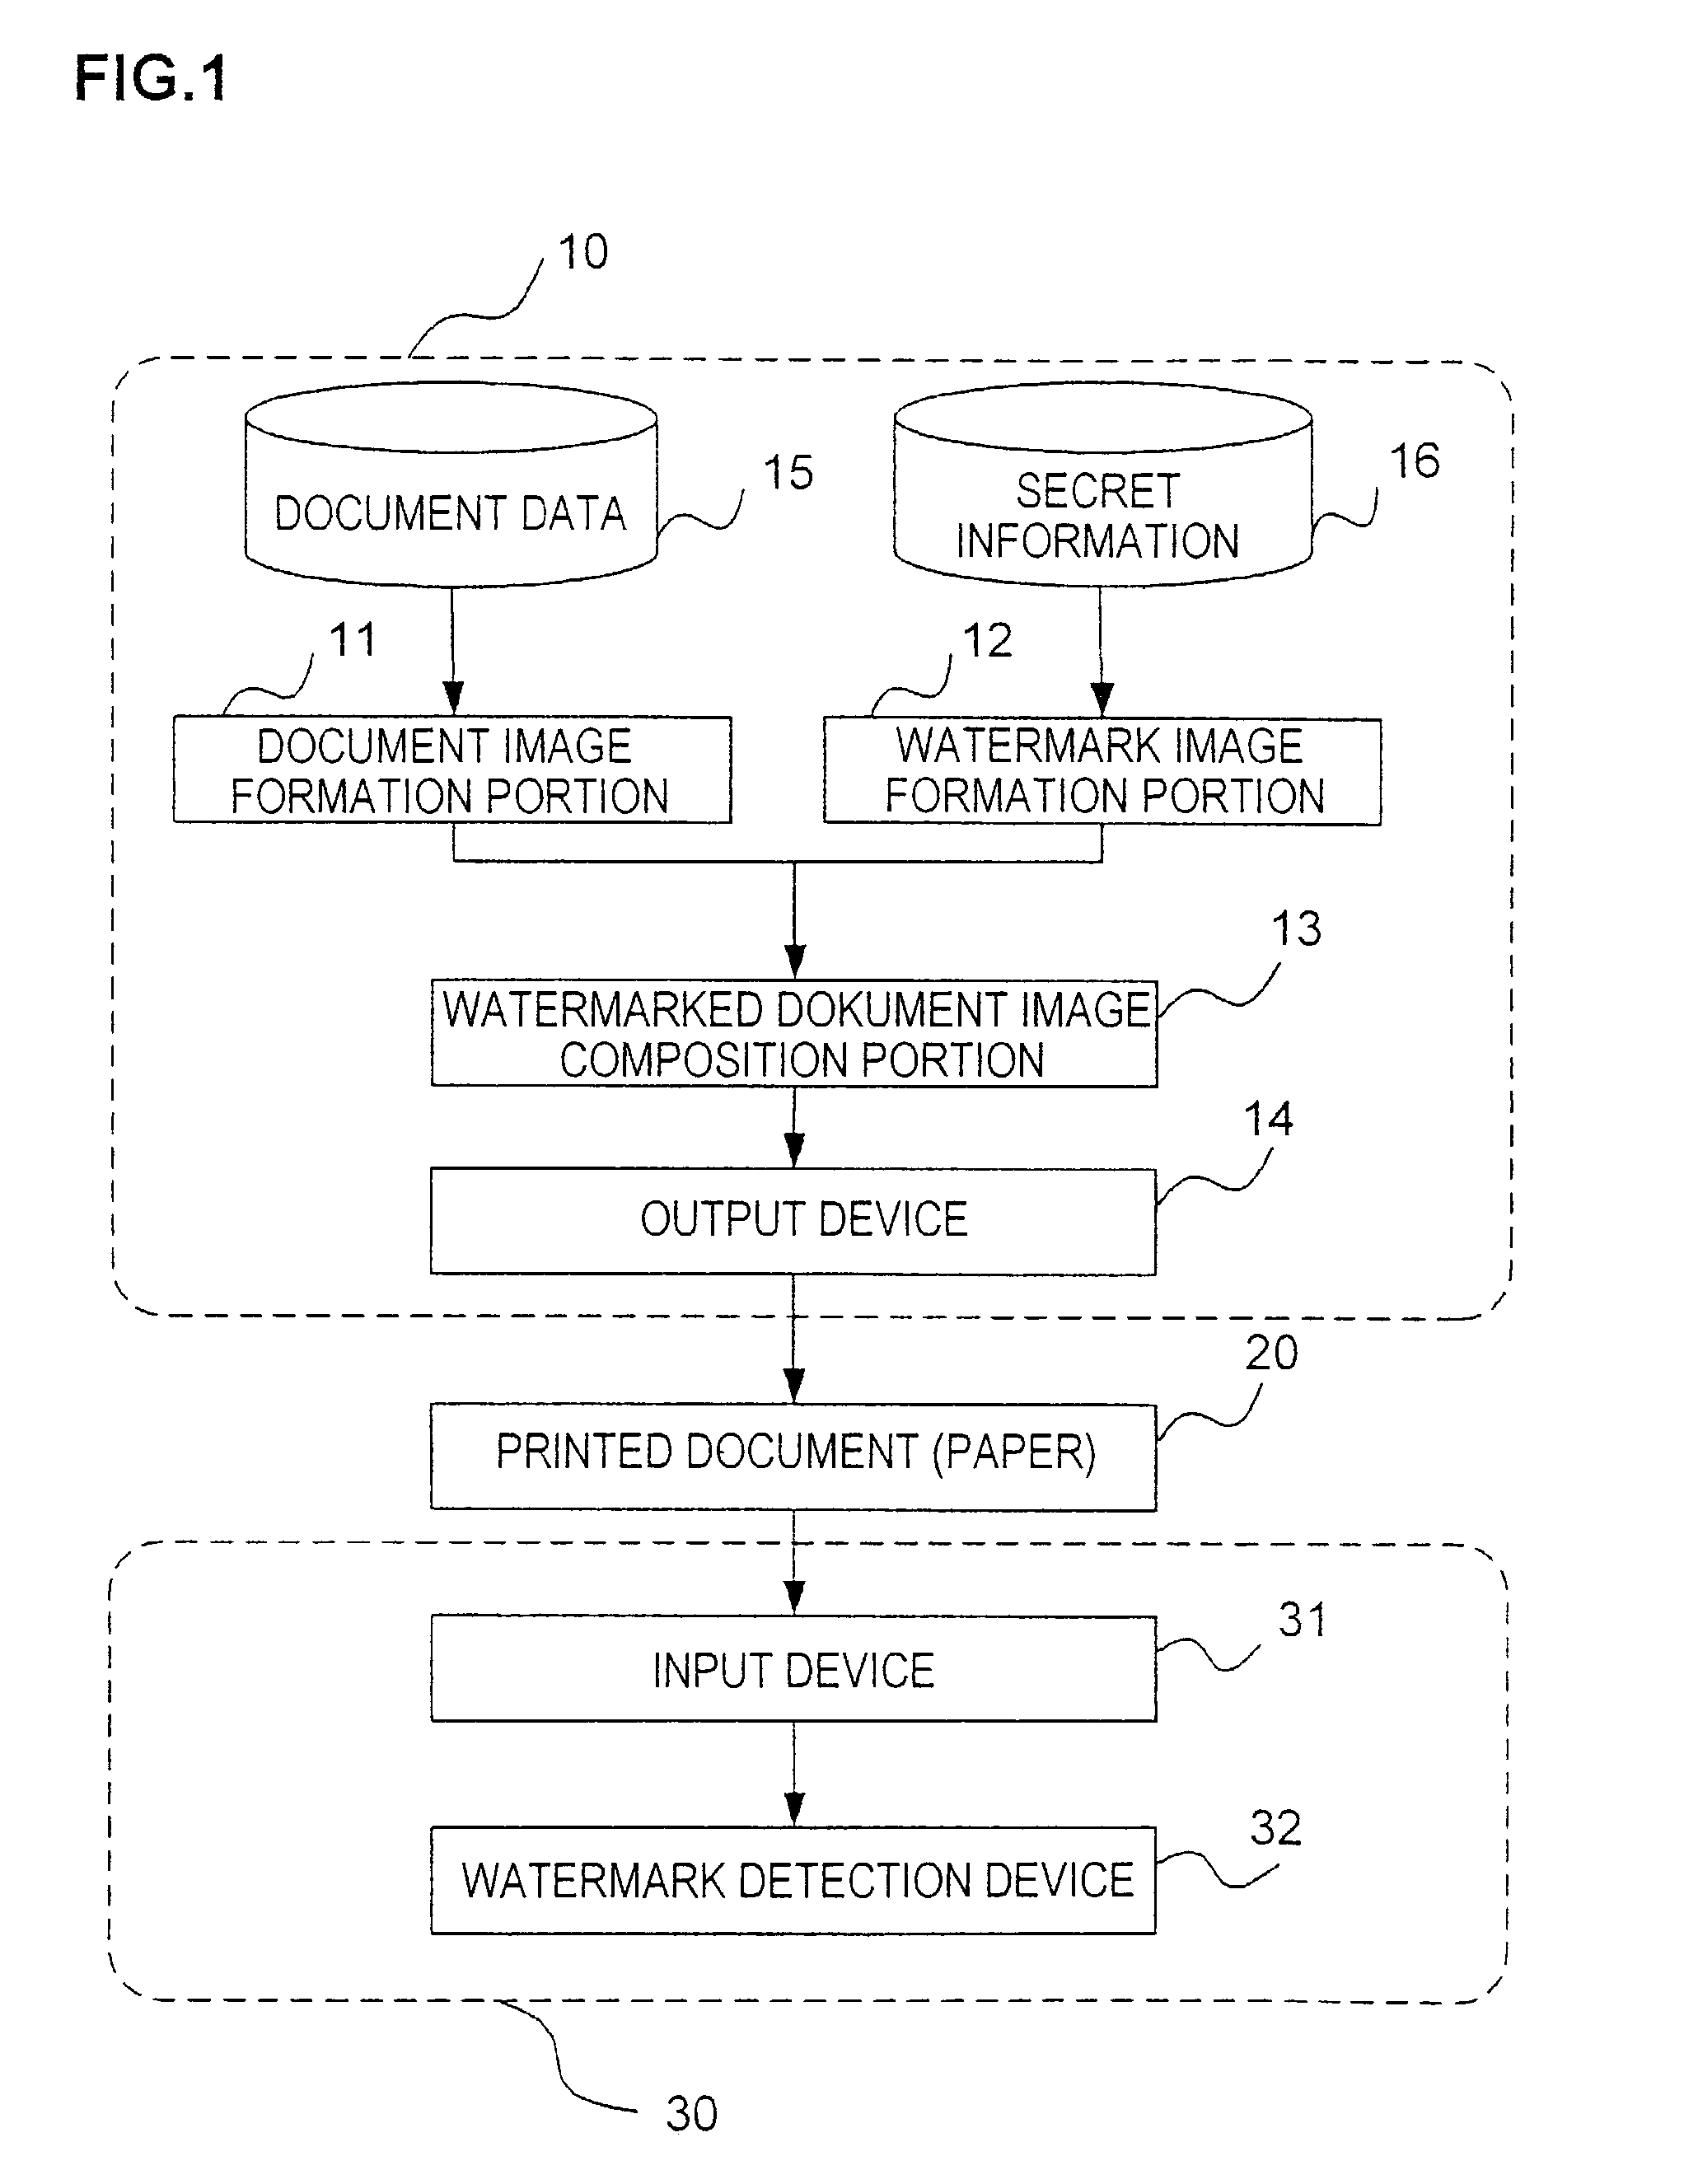 Watermark information embedment device and watermark information detection device